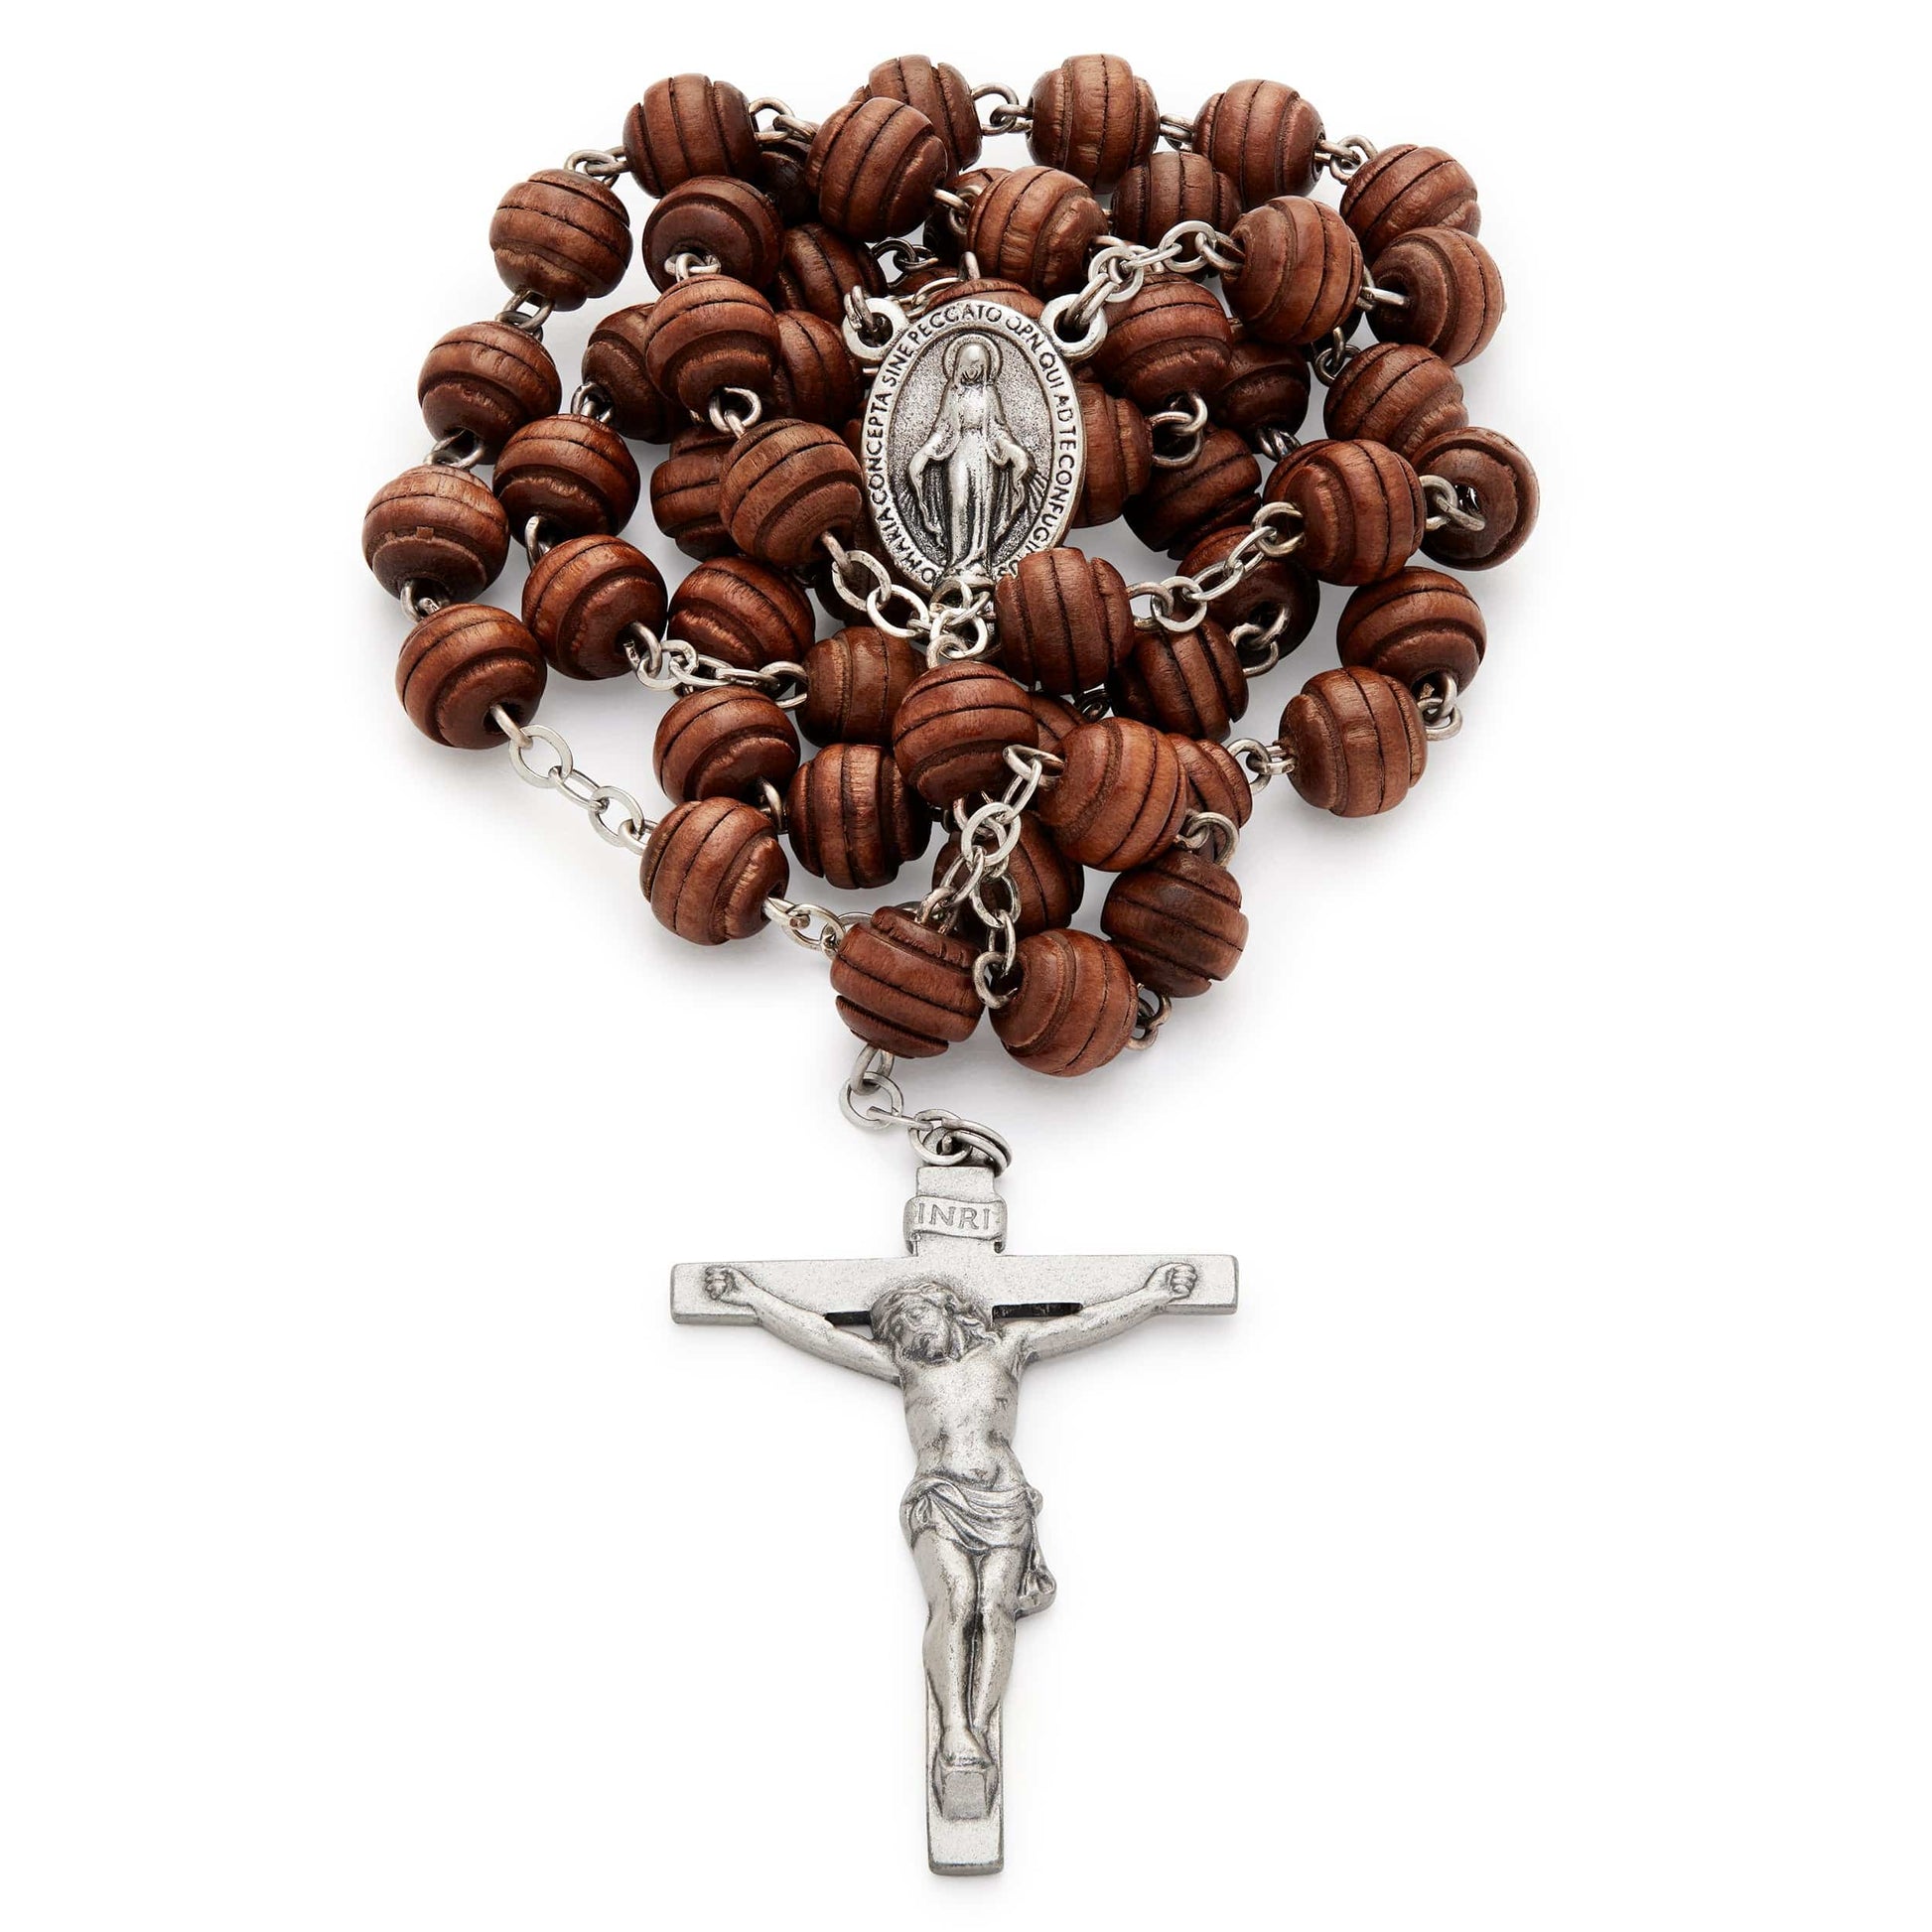 MONDO CATTOLICO Prayer Beads 46.5 cm (18.30 in) / 8 mm (0.31 in) Silver Rosary in Brown Wood